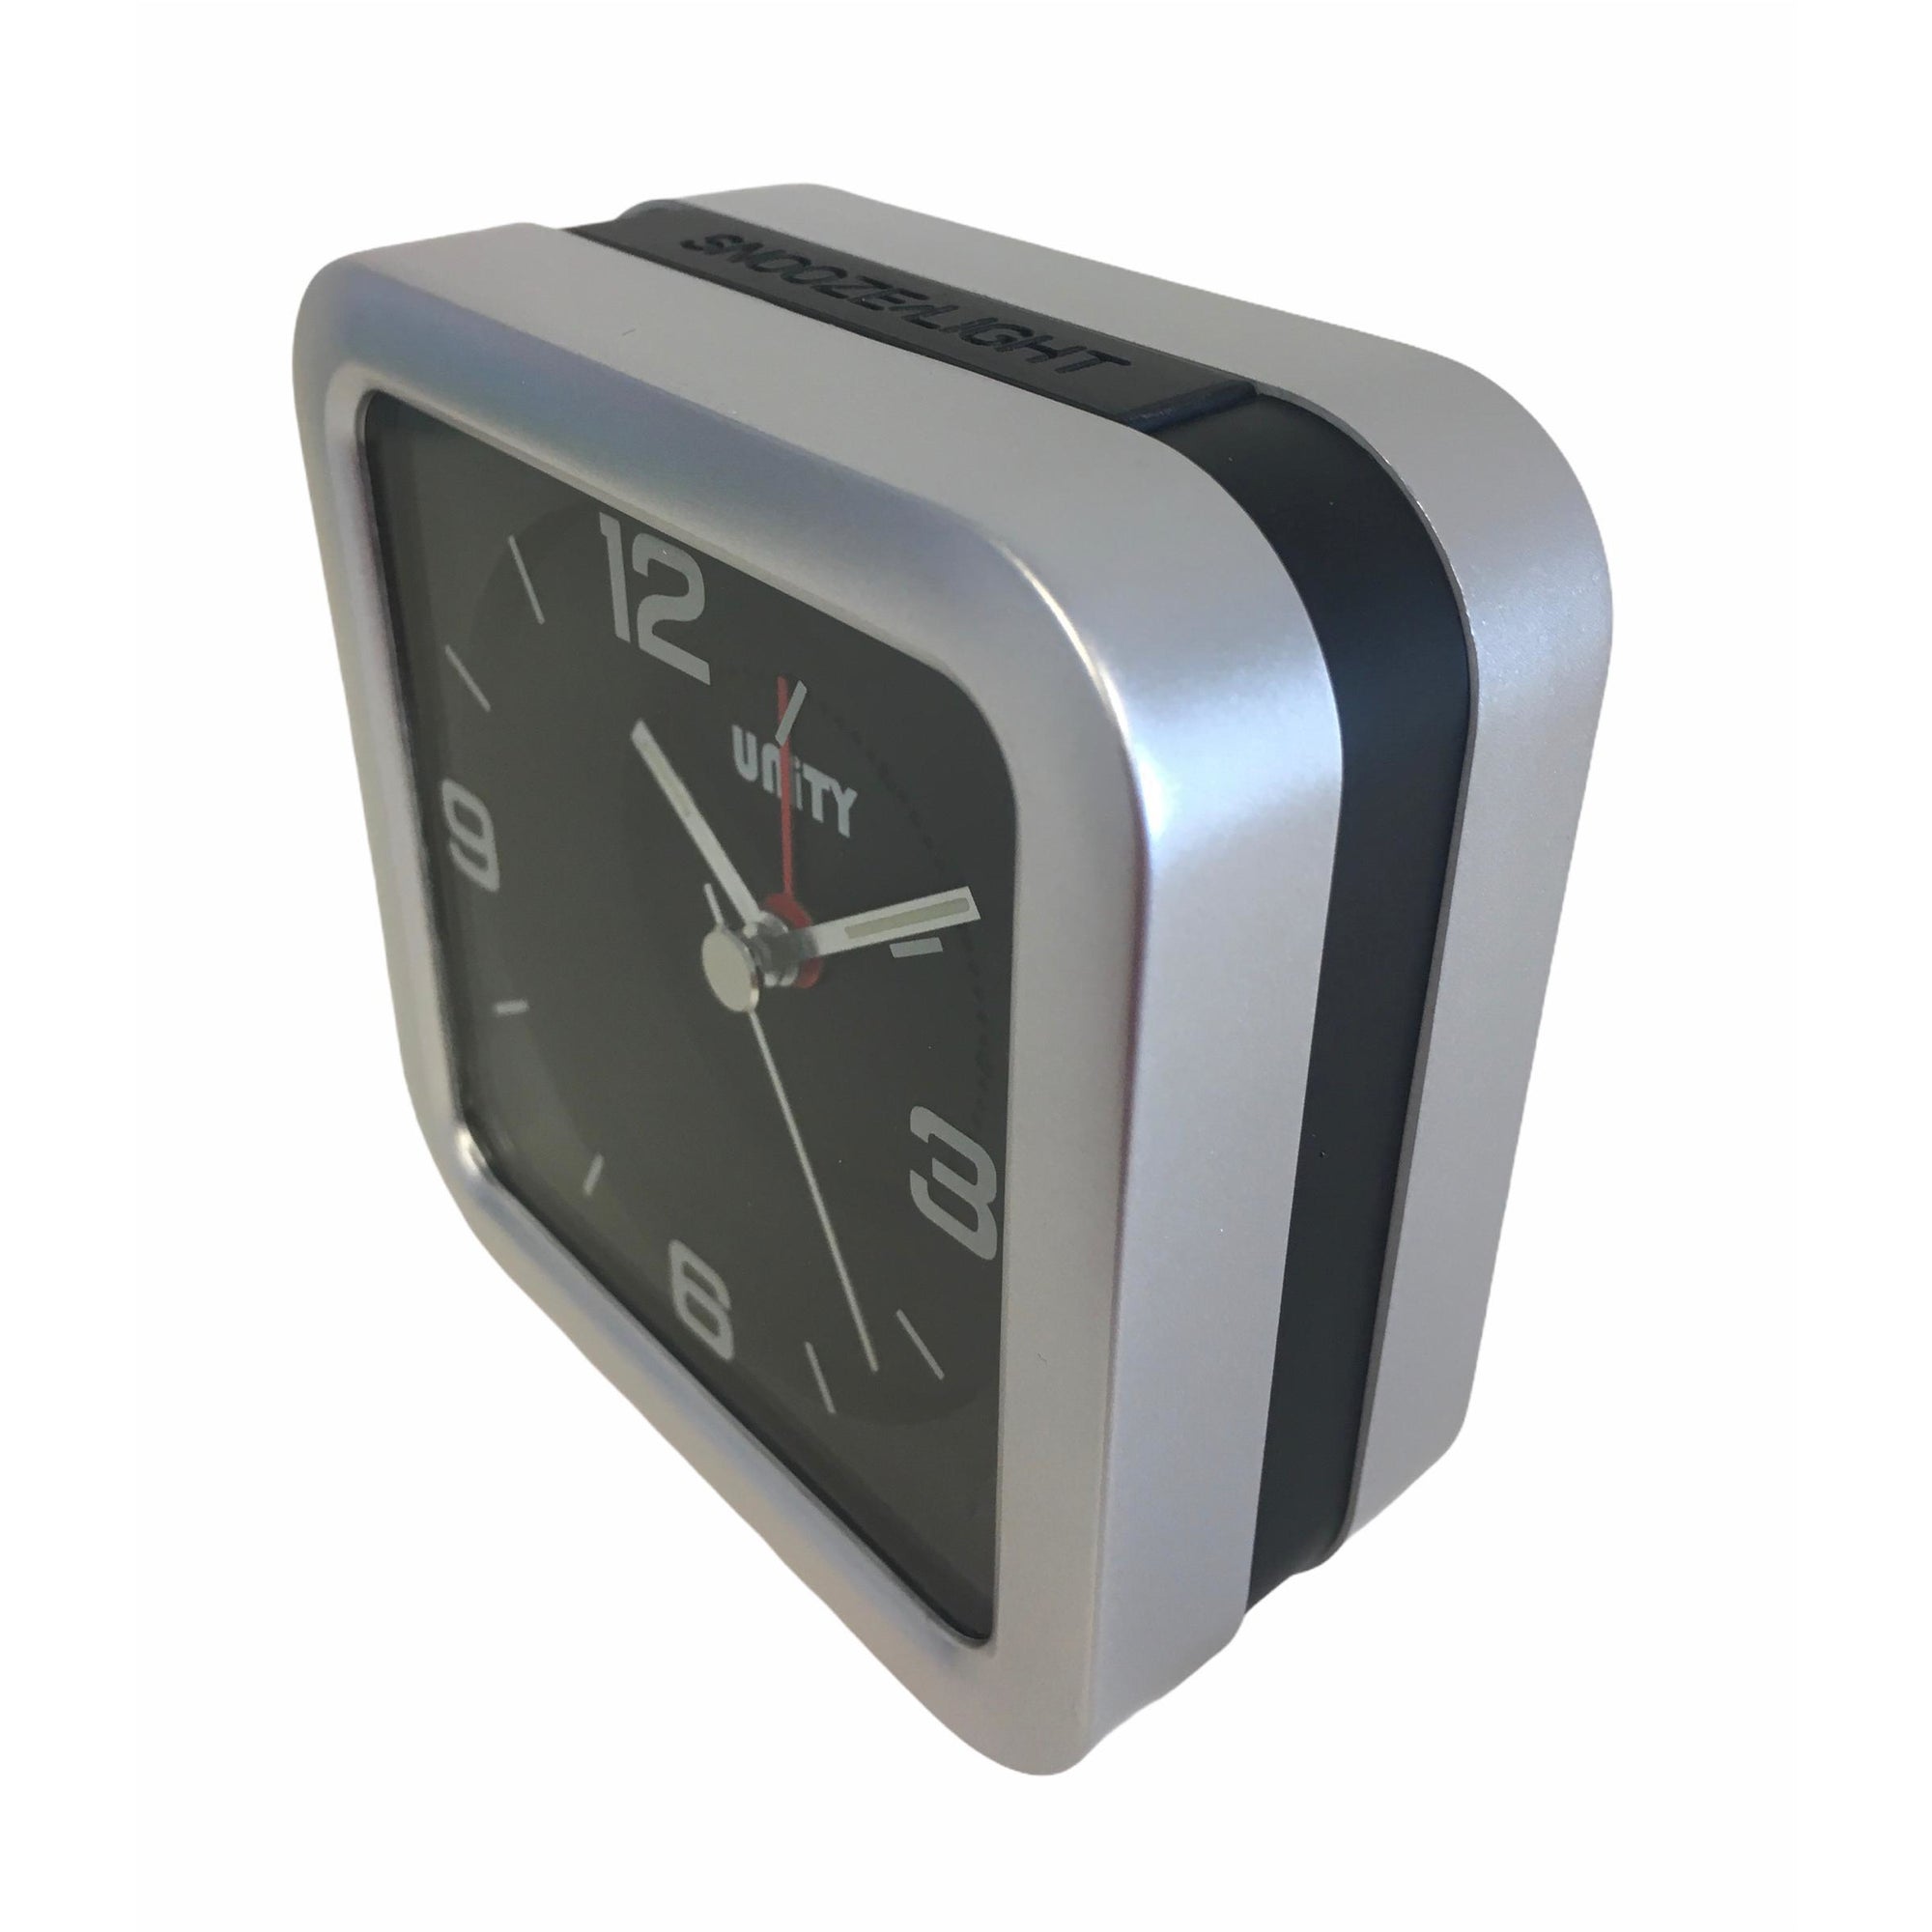 Square Beep Alarm Clock in Silver and Black